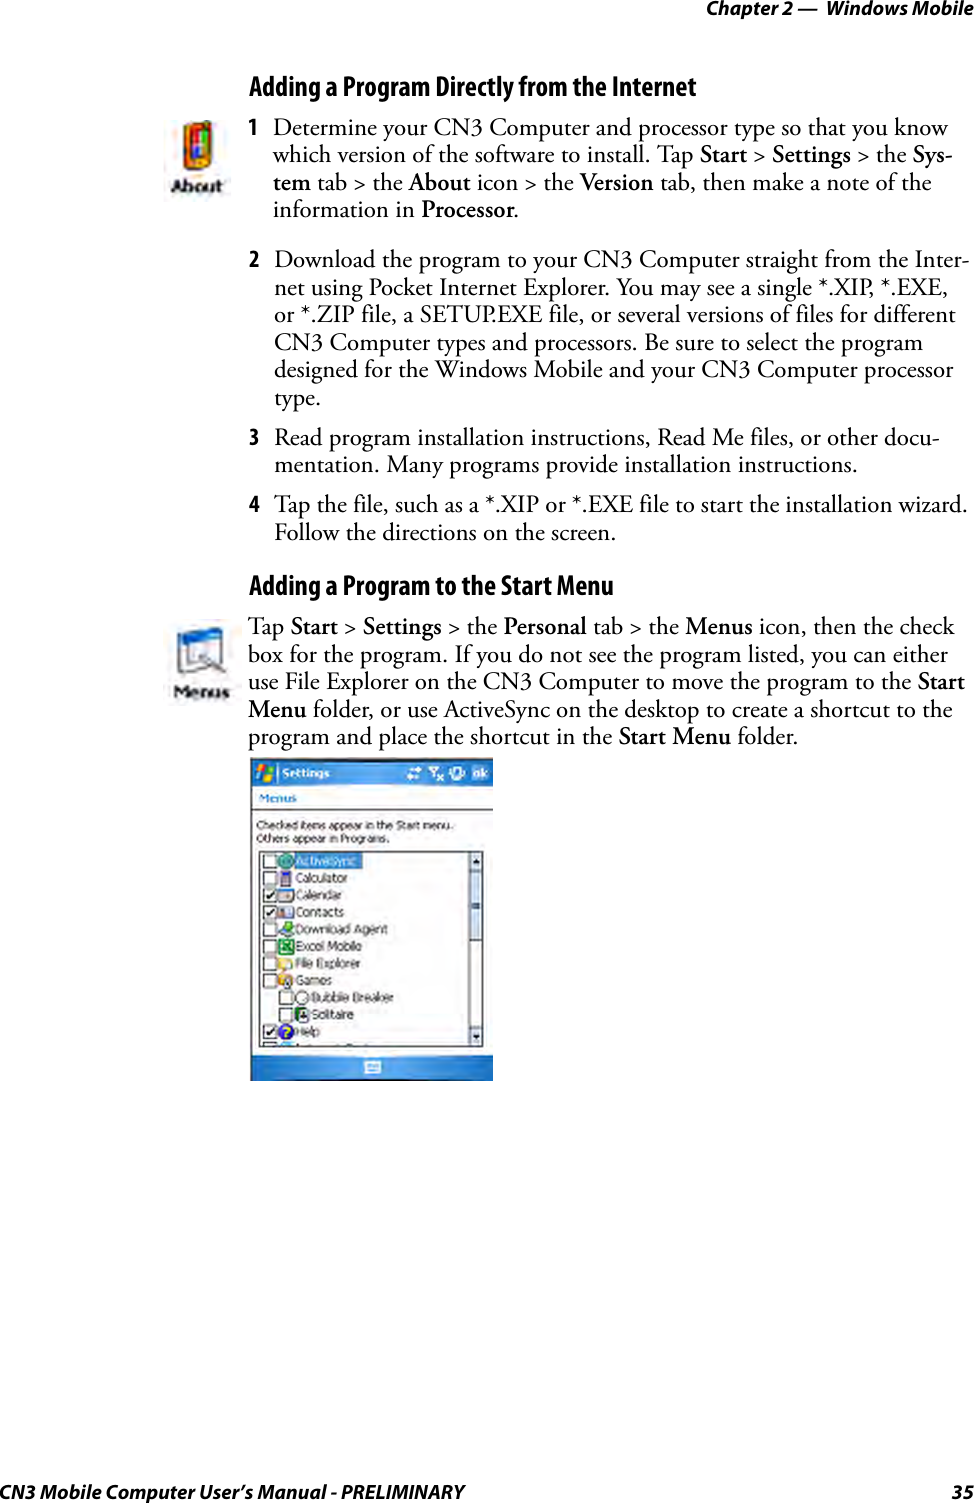 Chapter 2 —  Windows MobileCN3 Mobile Computer User’s Manual - PRELIMINARY 35Adding a Program Directly from the Internet2Download the program to your CN3 Computer straight from the Inter-net using Pocket Internet Explorer. You may see a single *.XIP, *.EXE, or *.ZIP file, a SETUP.EXE file, or several versions of files for different CN3 Computer types and processors. Be sure to select the program designed for the Windows Mobile and your CN3 Computer processor type.3Read program installation instructions, Read Me files, or other docu-mentation. Many programs provide installation instructions.4Tap the file, such as a *.XIP or *.EXE file to start the installation wizard. Follow the directions on the screen.Adding a Program to the Start Menu1Determine your CN3 Computer and processor type so that you know which version of the software to install. Tap Start &gt; Settings &gt; the Sys-tem tab &gt; the About icon &gt; the Version tab, then make a note of the information in Processor.Tap Start &gt; Settings &gt; the Personal tab &gt; the Menus icon, then the check box for the program. If you do not see the program listed, you can either use File Explorer on the CN3 Computer to move the program to the Start Menu folder, or use ActiveSync on the desktop to create a shortcut to the program and place the shortcut in the Start Menu folder.